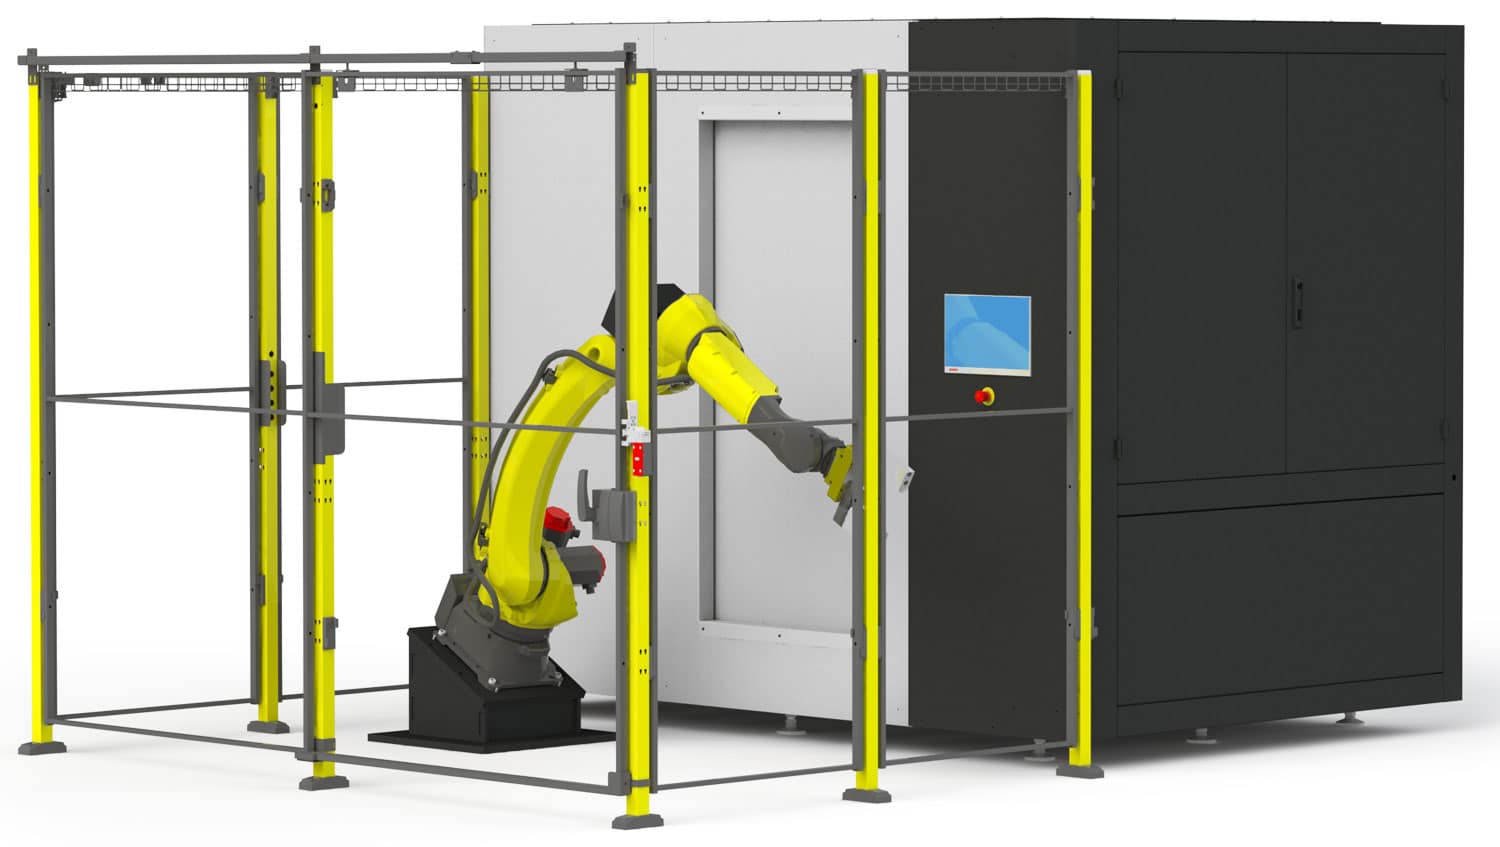 X5000 Automated X-ray Inspection system